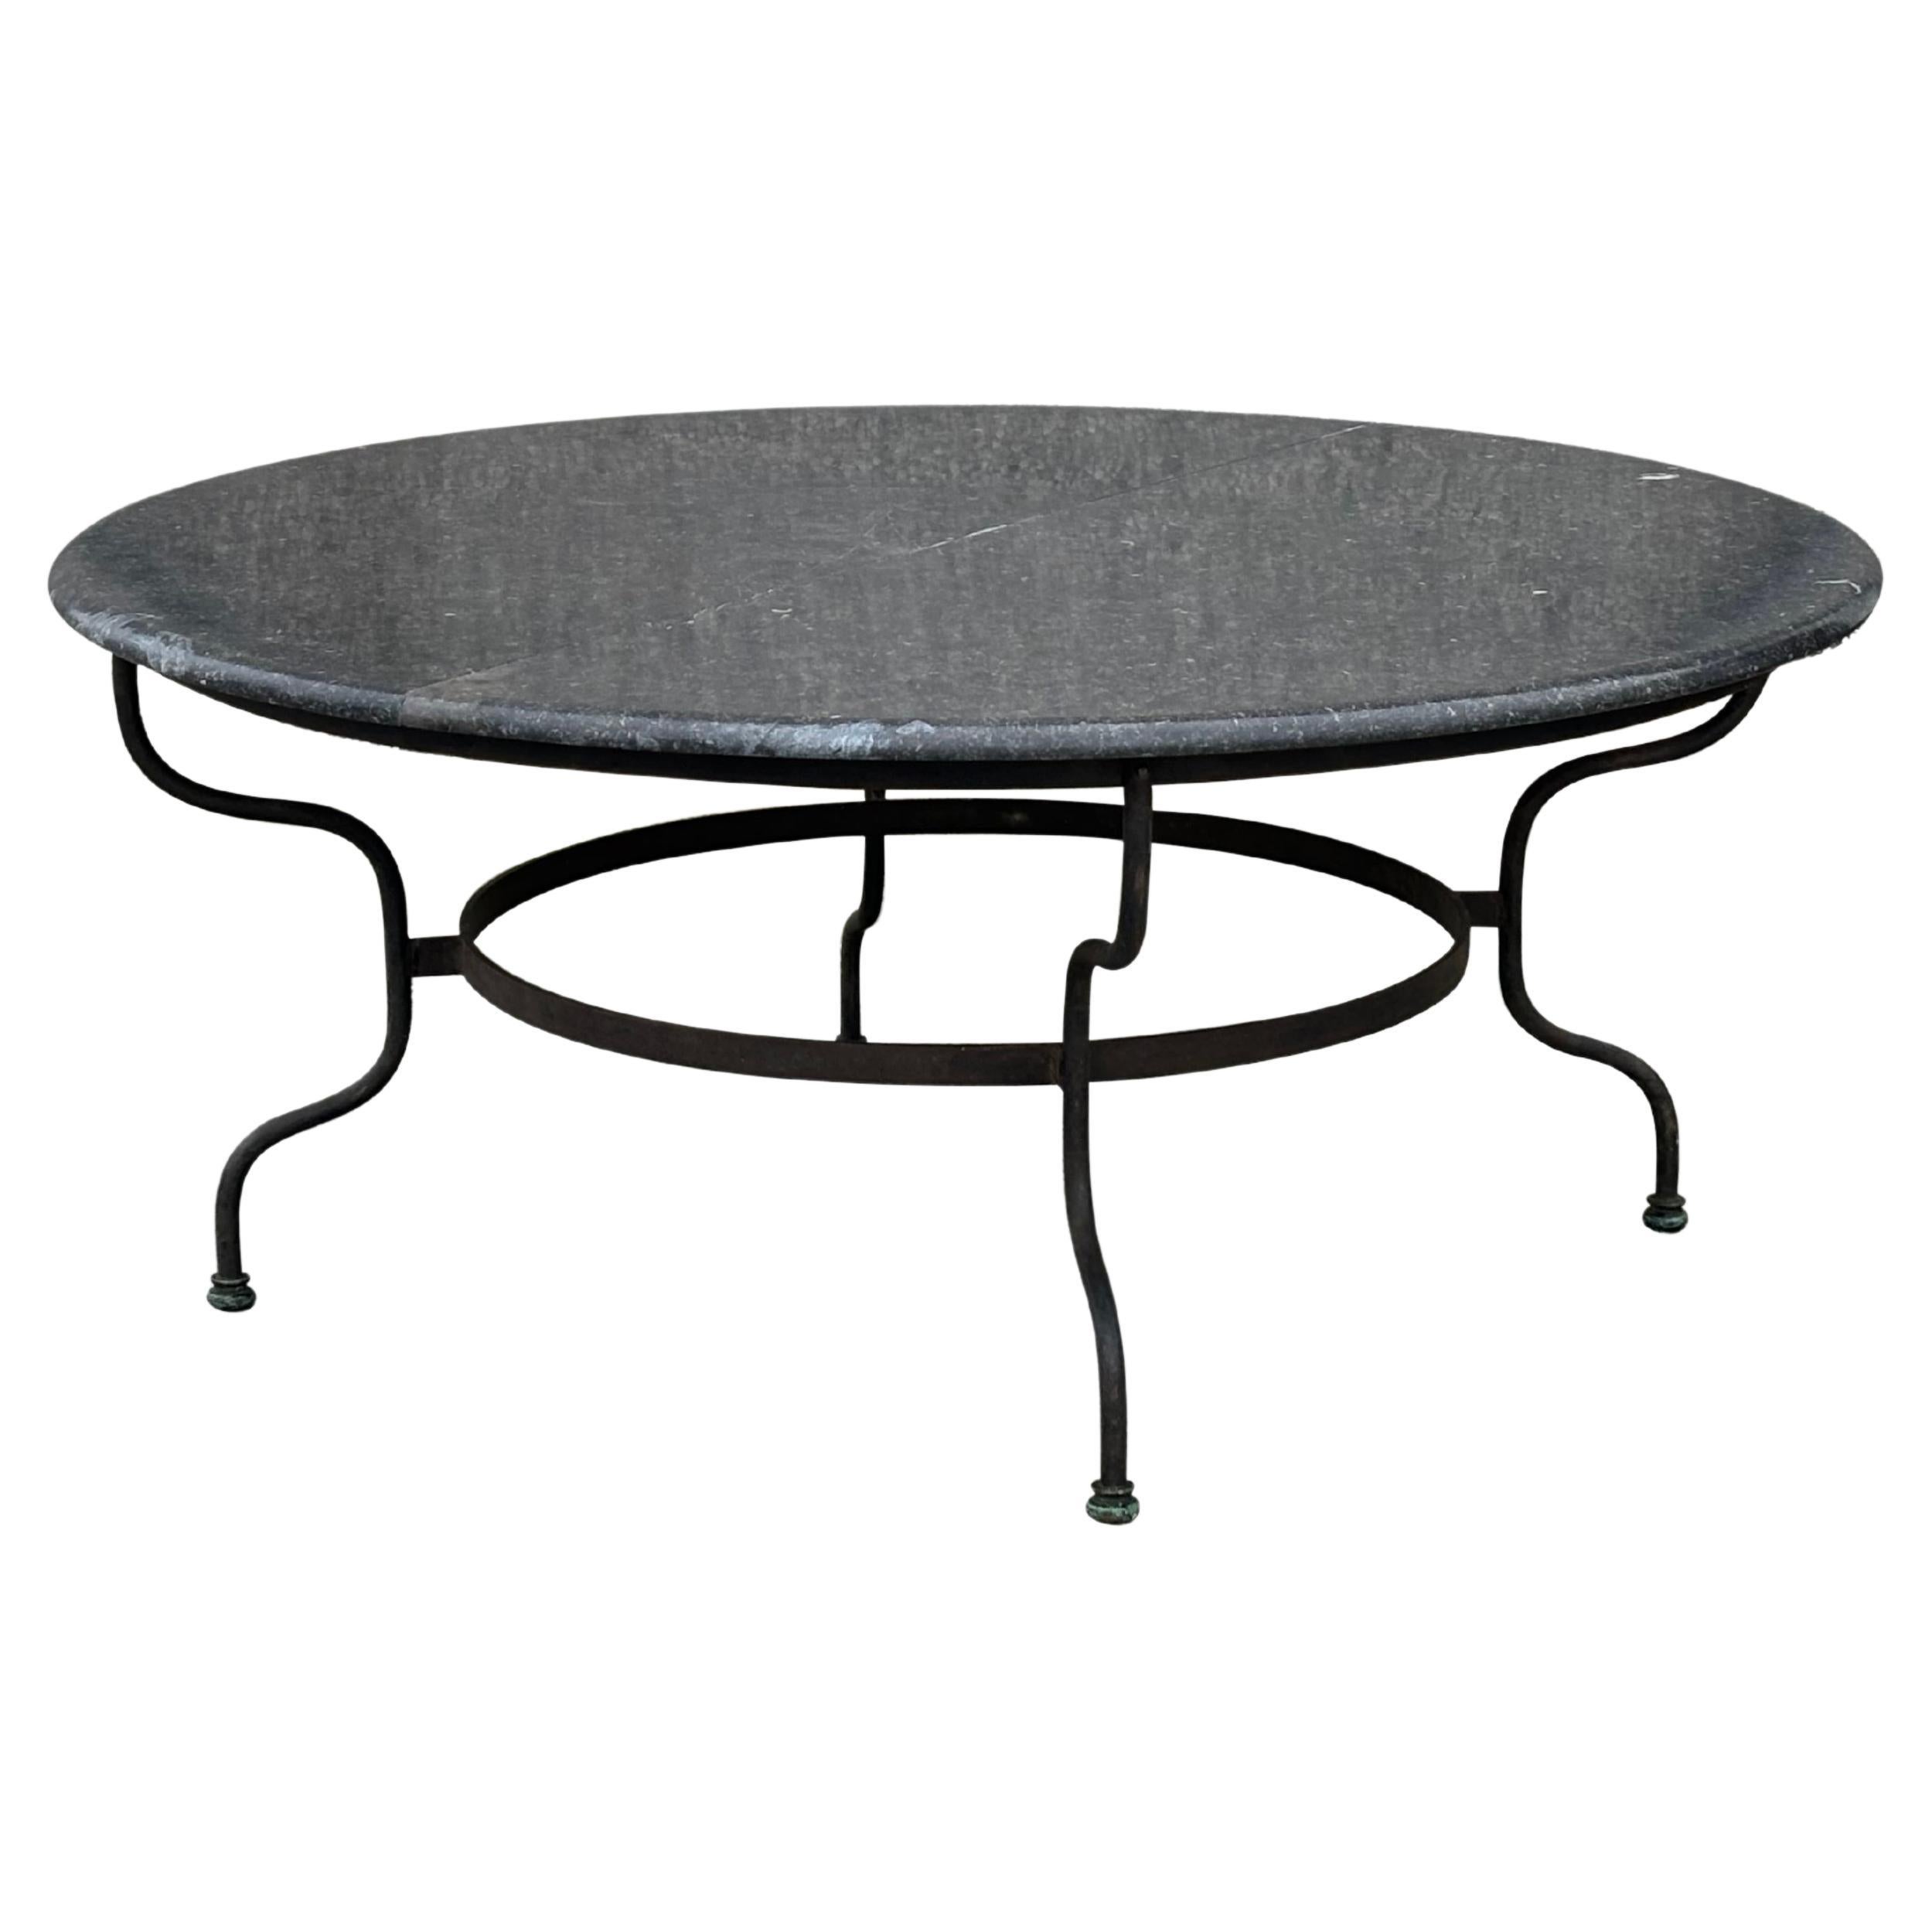 Large French Circular Granite Top Garden Patio Dining Table